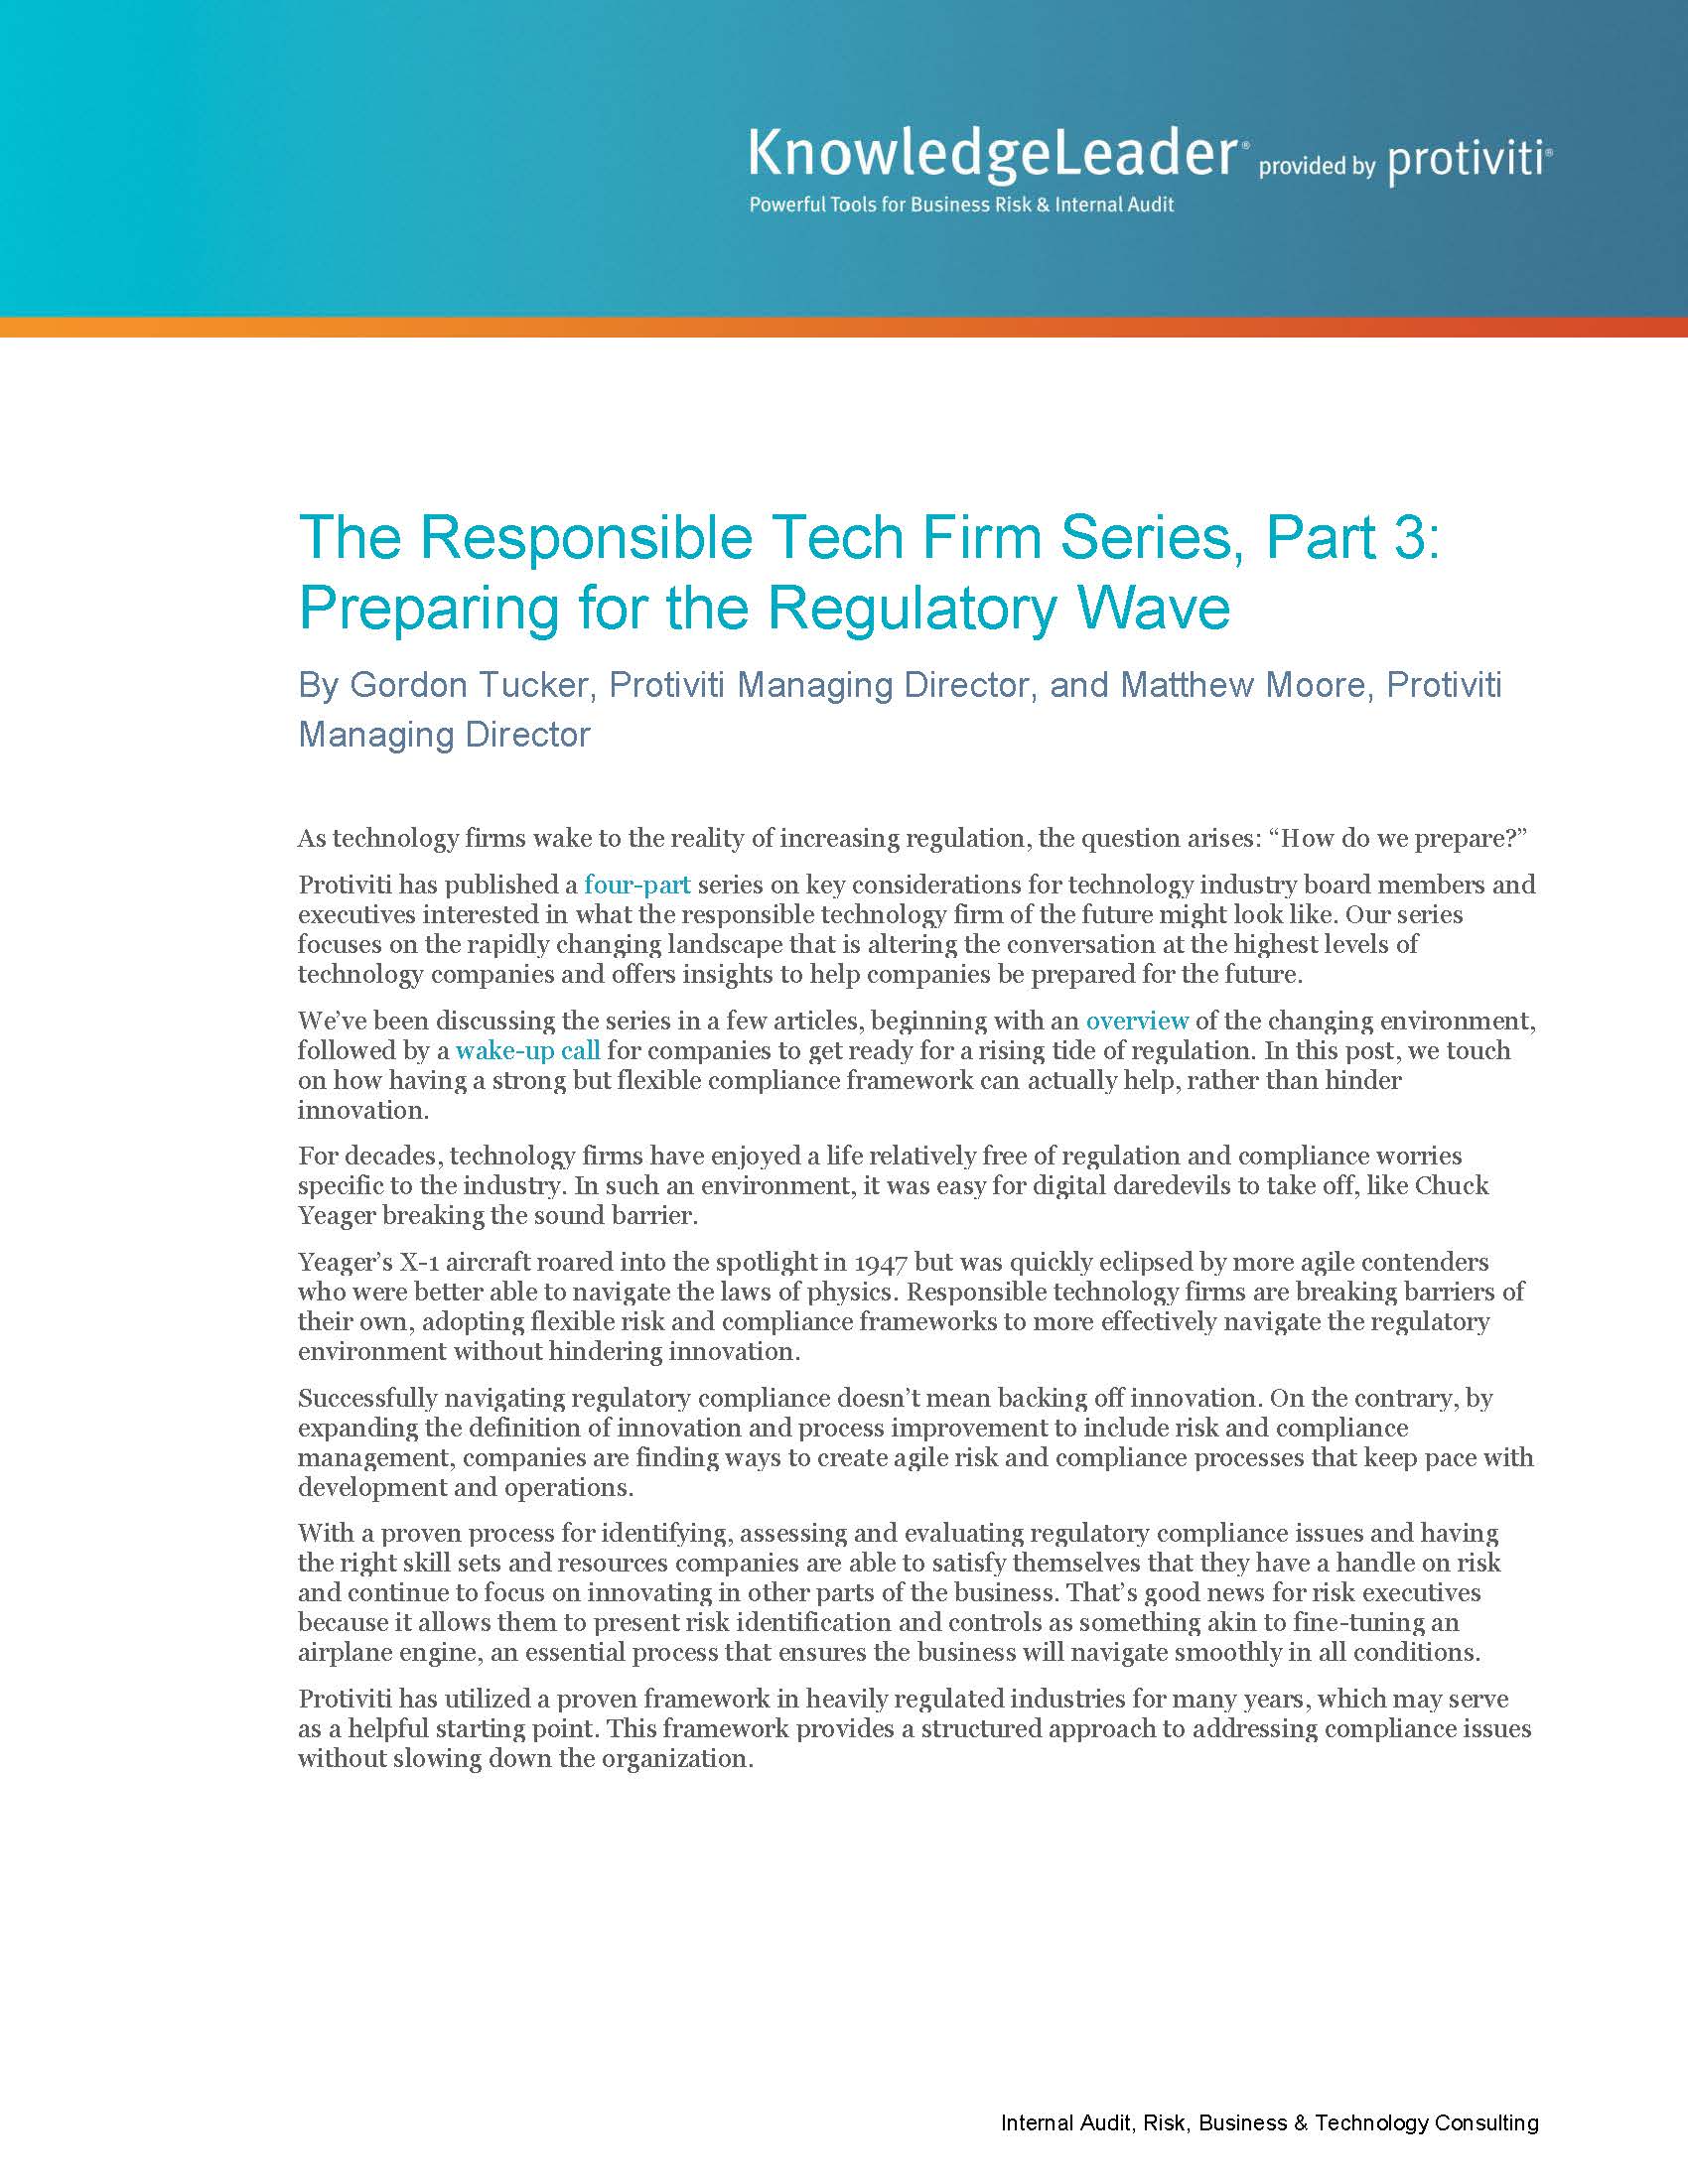 Screenshot of the first page of The Responsible Tech Firm Series, Part 3 Preparing for the Regulatory Wave